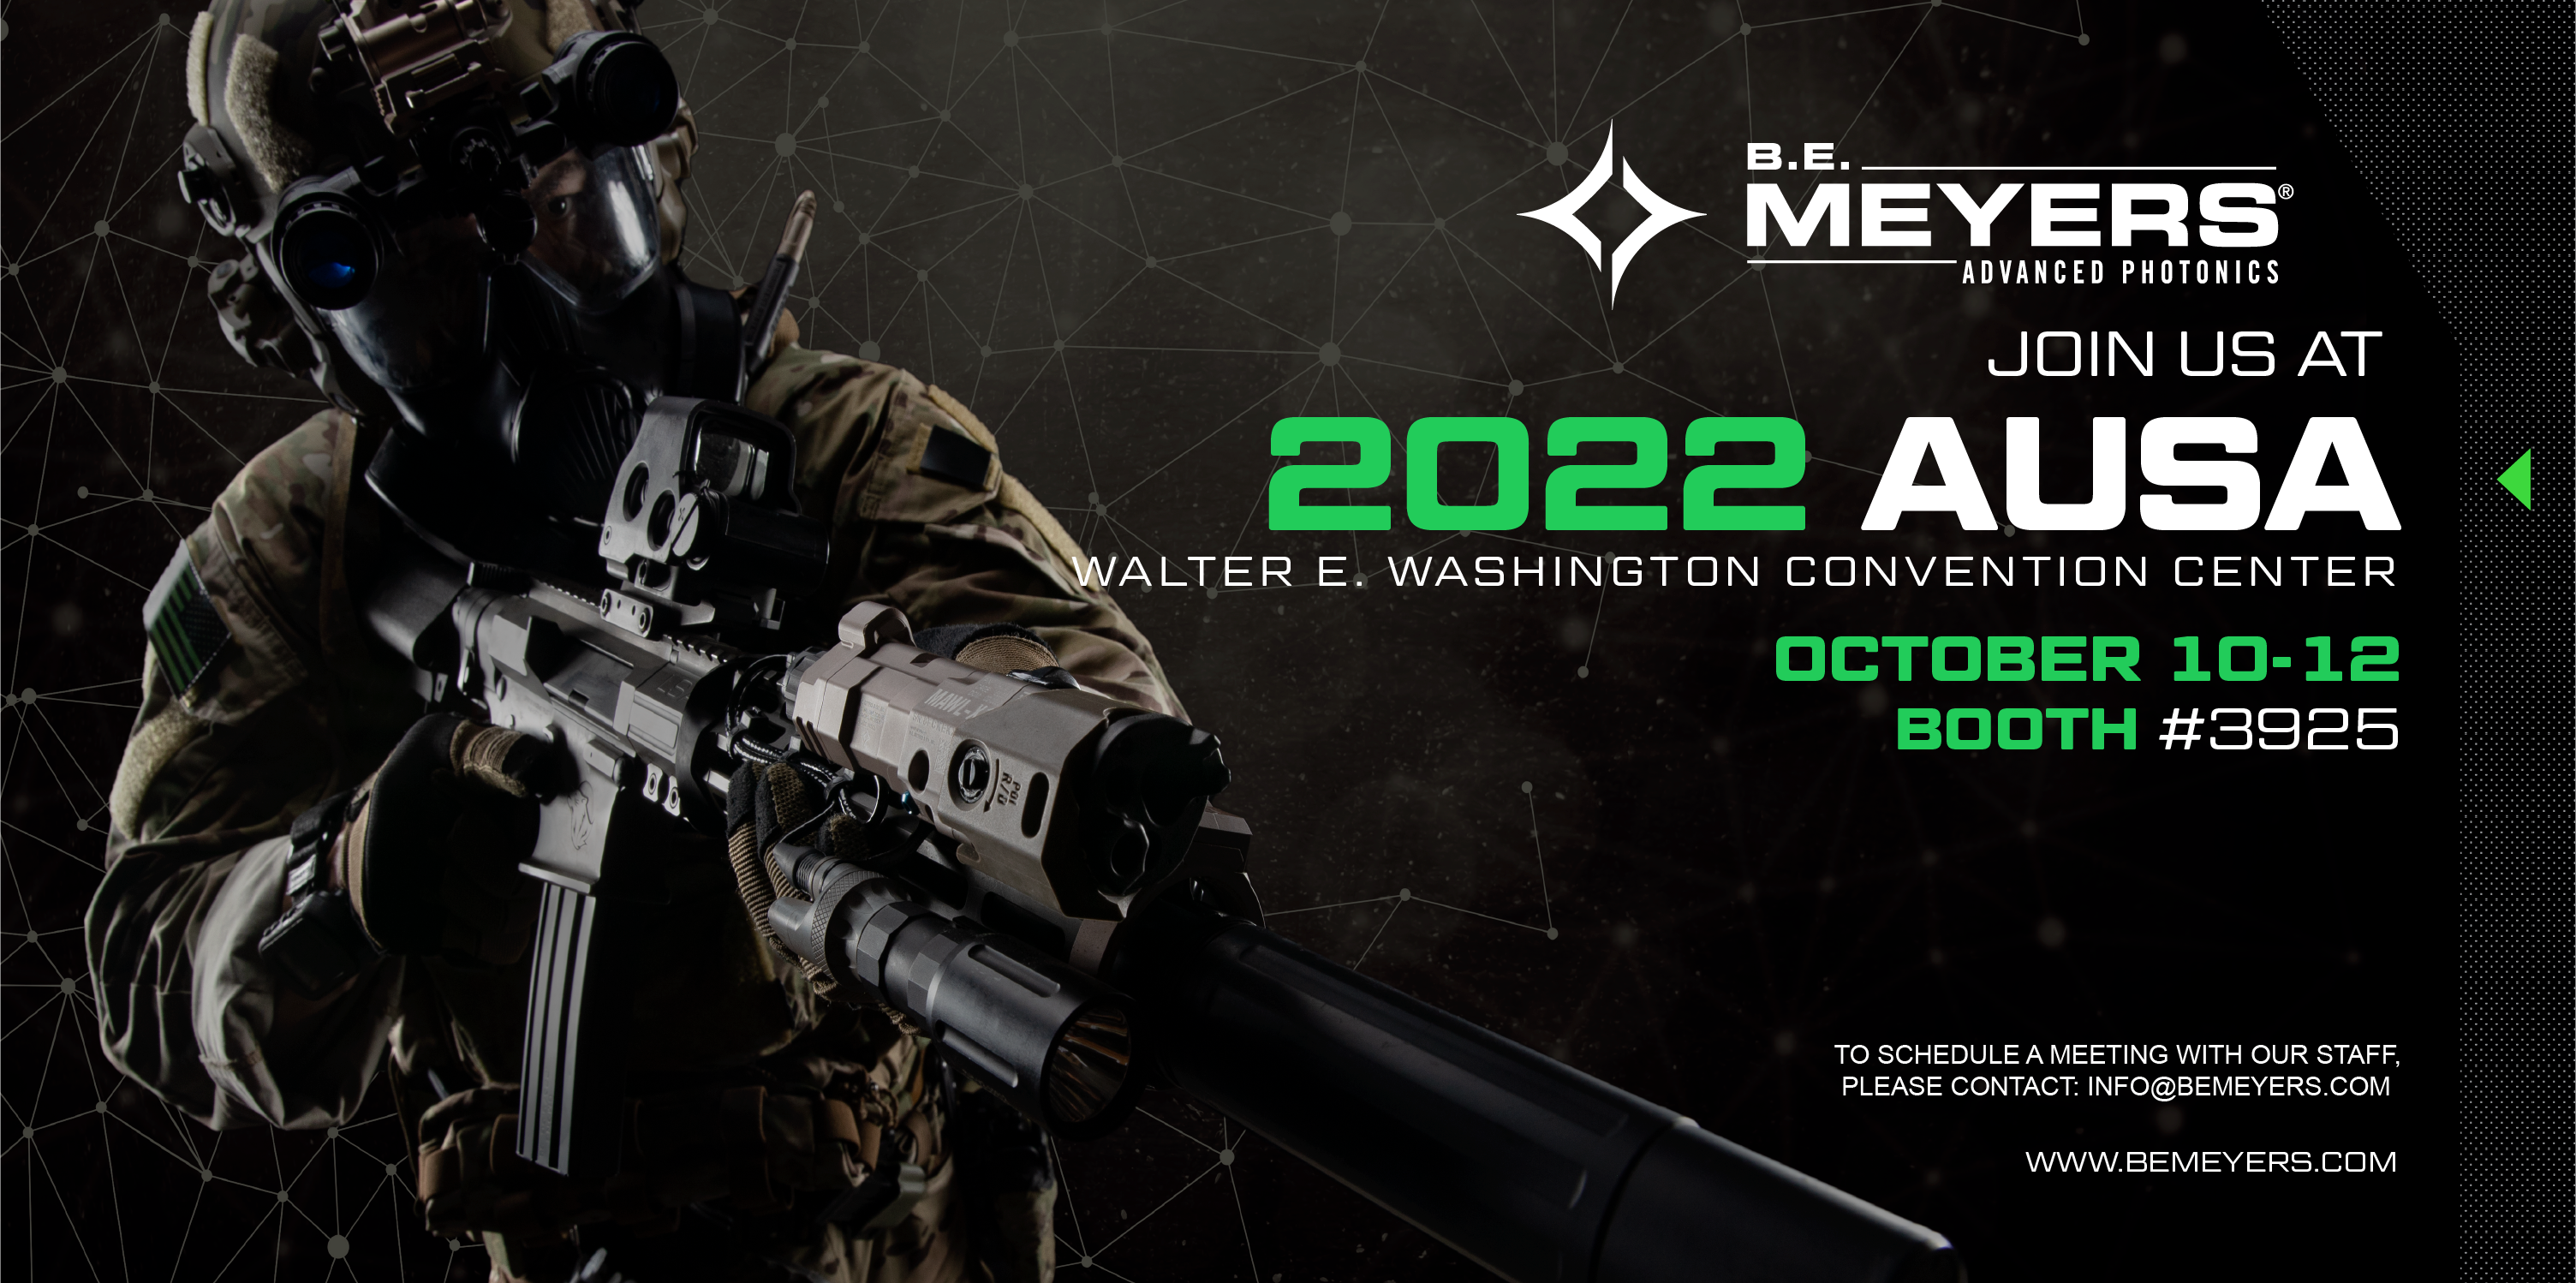 B.E. Meyers & Co Exhibiting at AUSA 2022